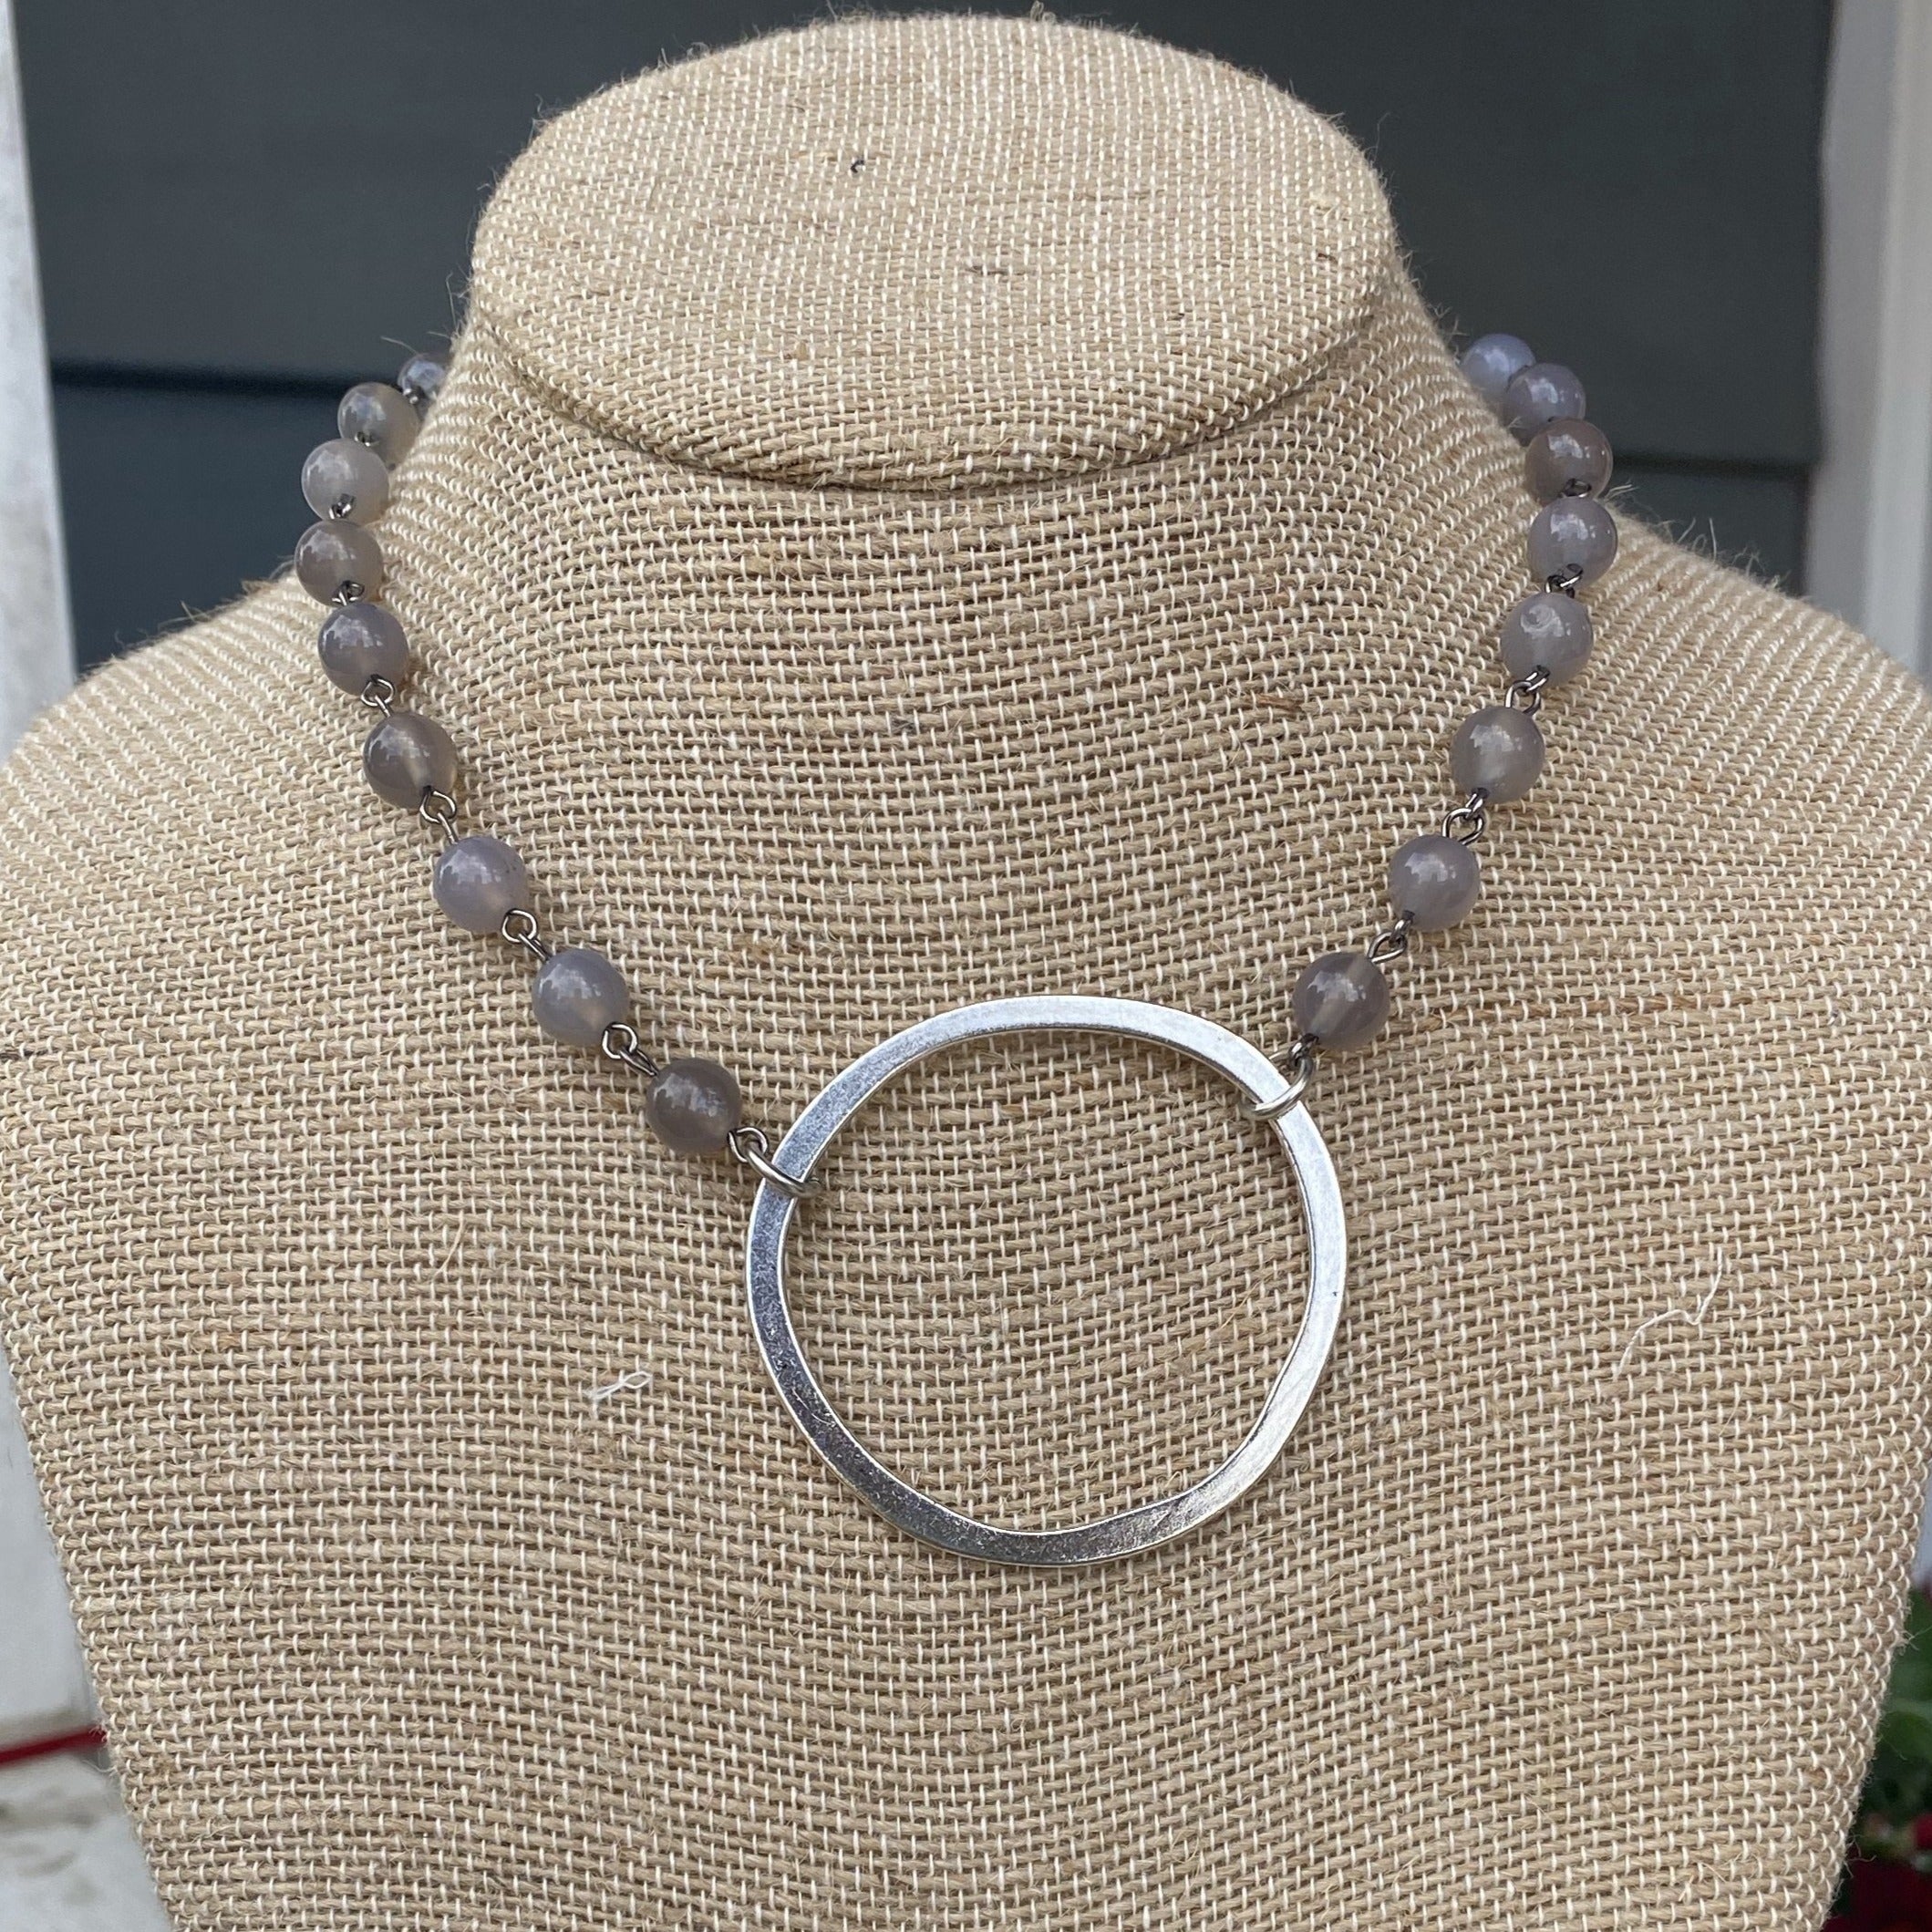 Beaded Necklace with Large Hammered Circle Pendant